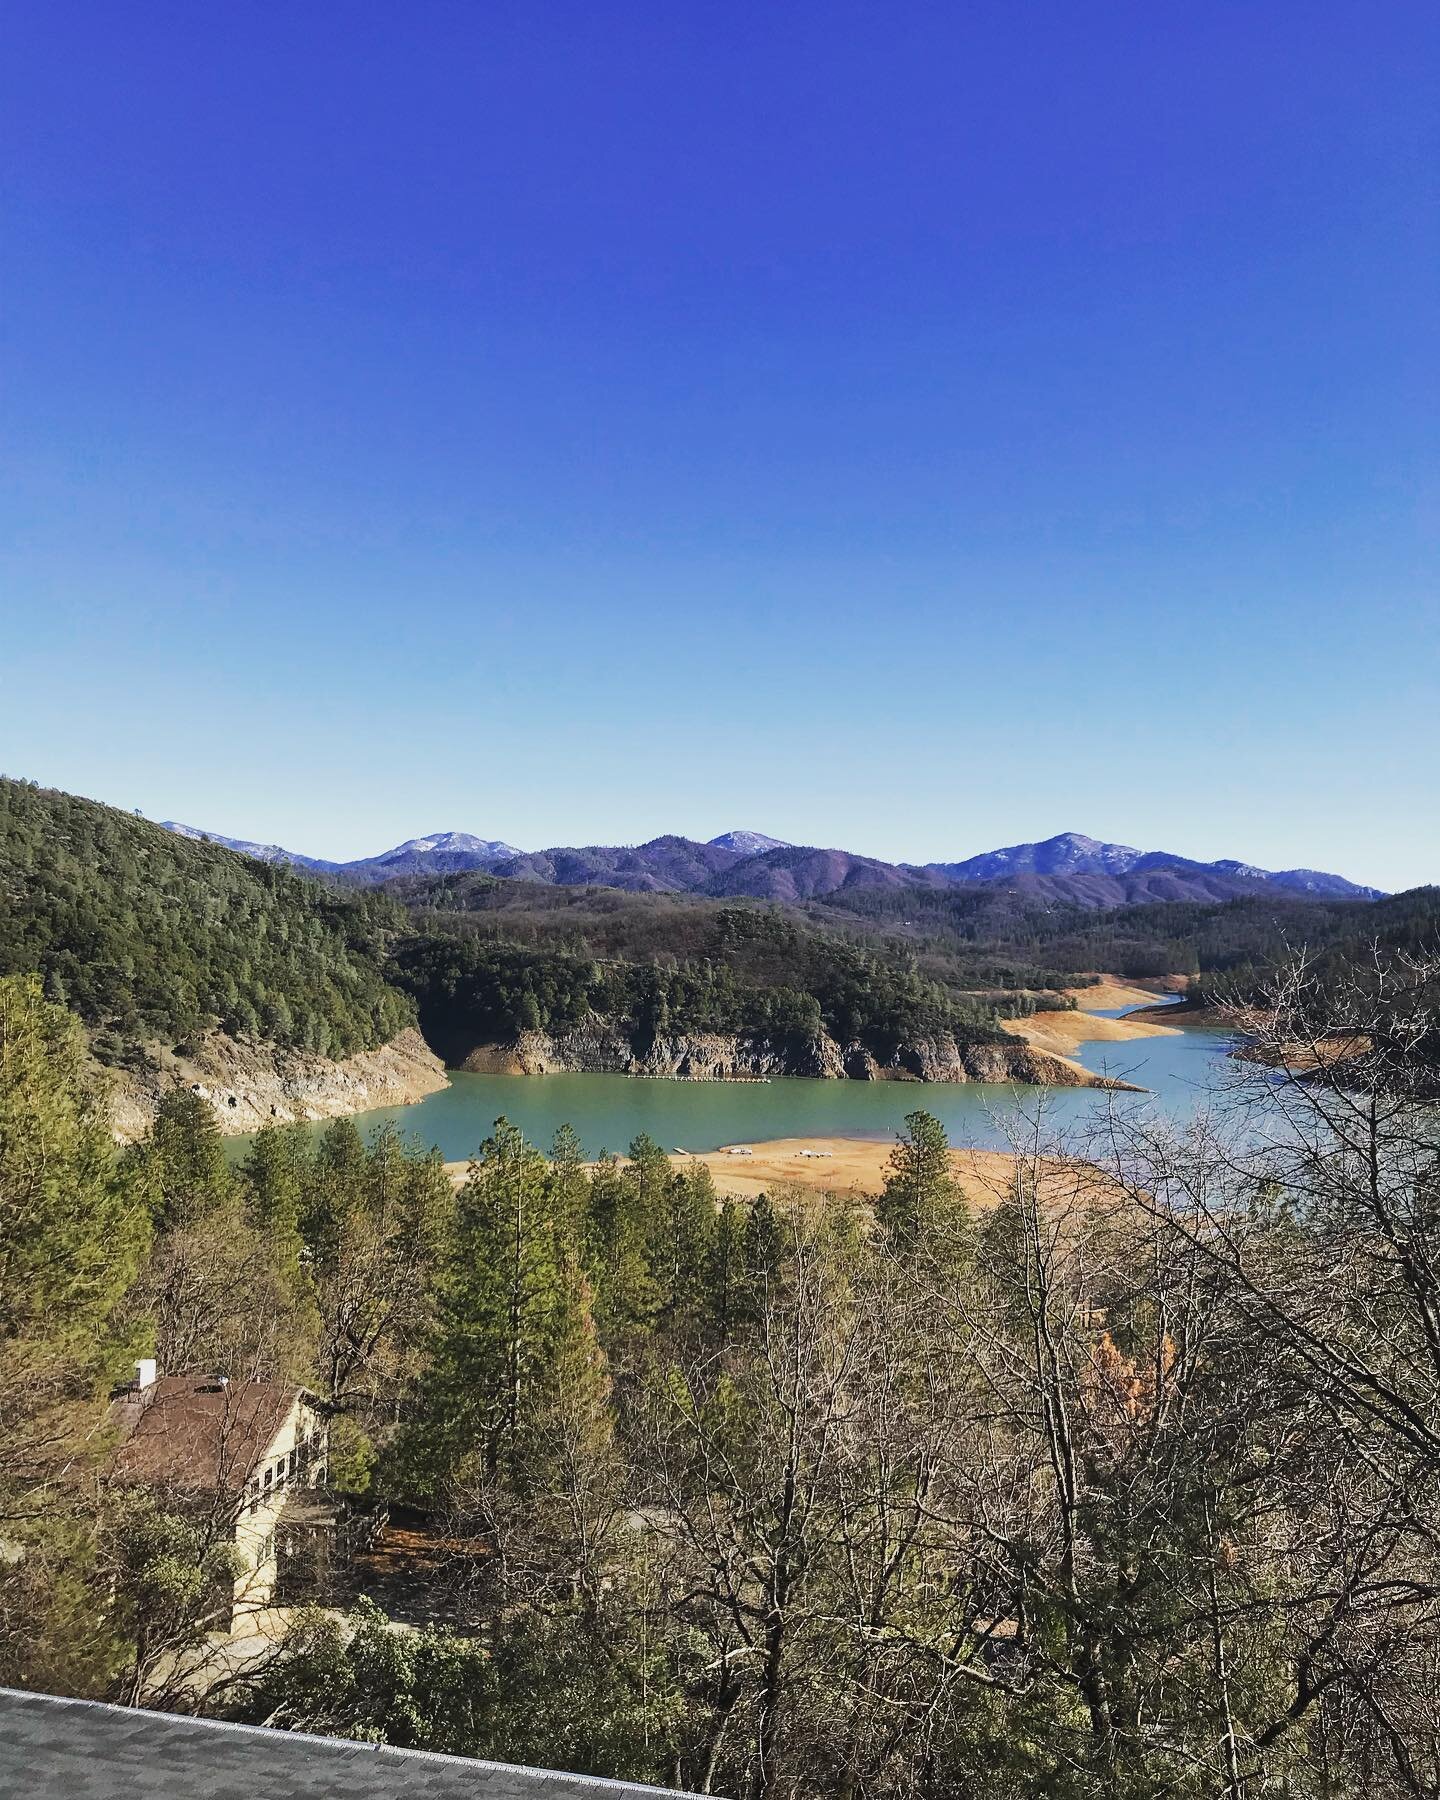 Enjoyed a beautiful view of Shasta Lake while working on this downspout and gutter guards installation! 🙌🏼🙌🏼🙌🏼

Contact us at 530.921.0309 for your free estimate! ☎️☎️☎️

Seamless Gutter Installations ✅
Downspout Installations ✅
Gutter Guards I